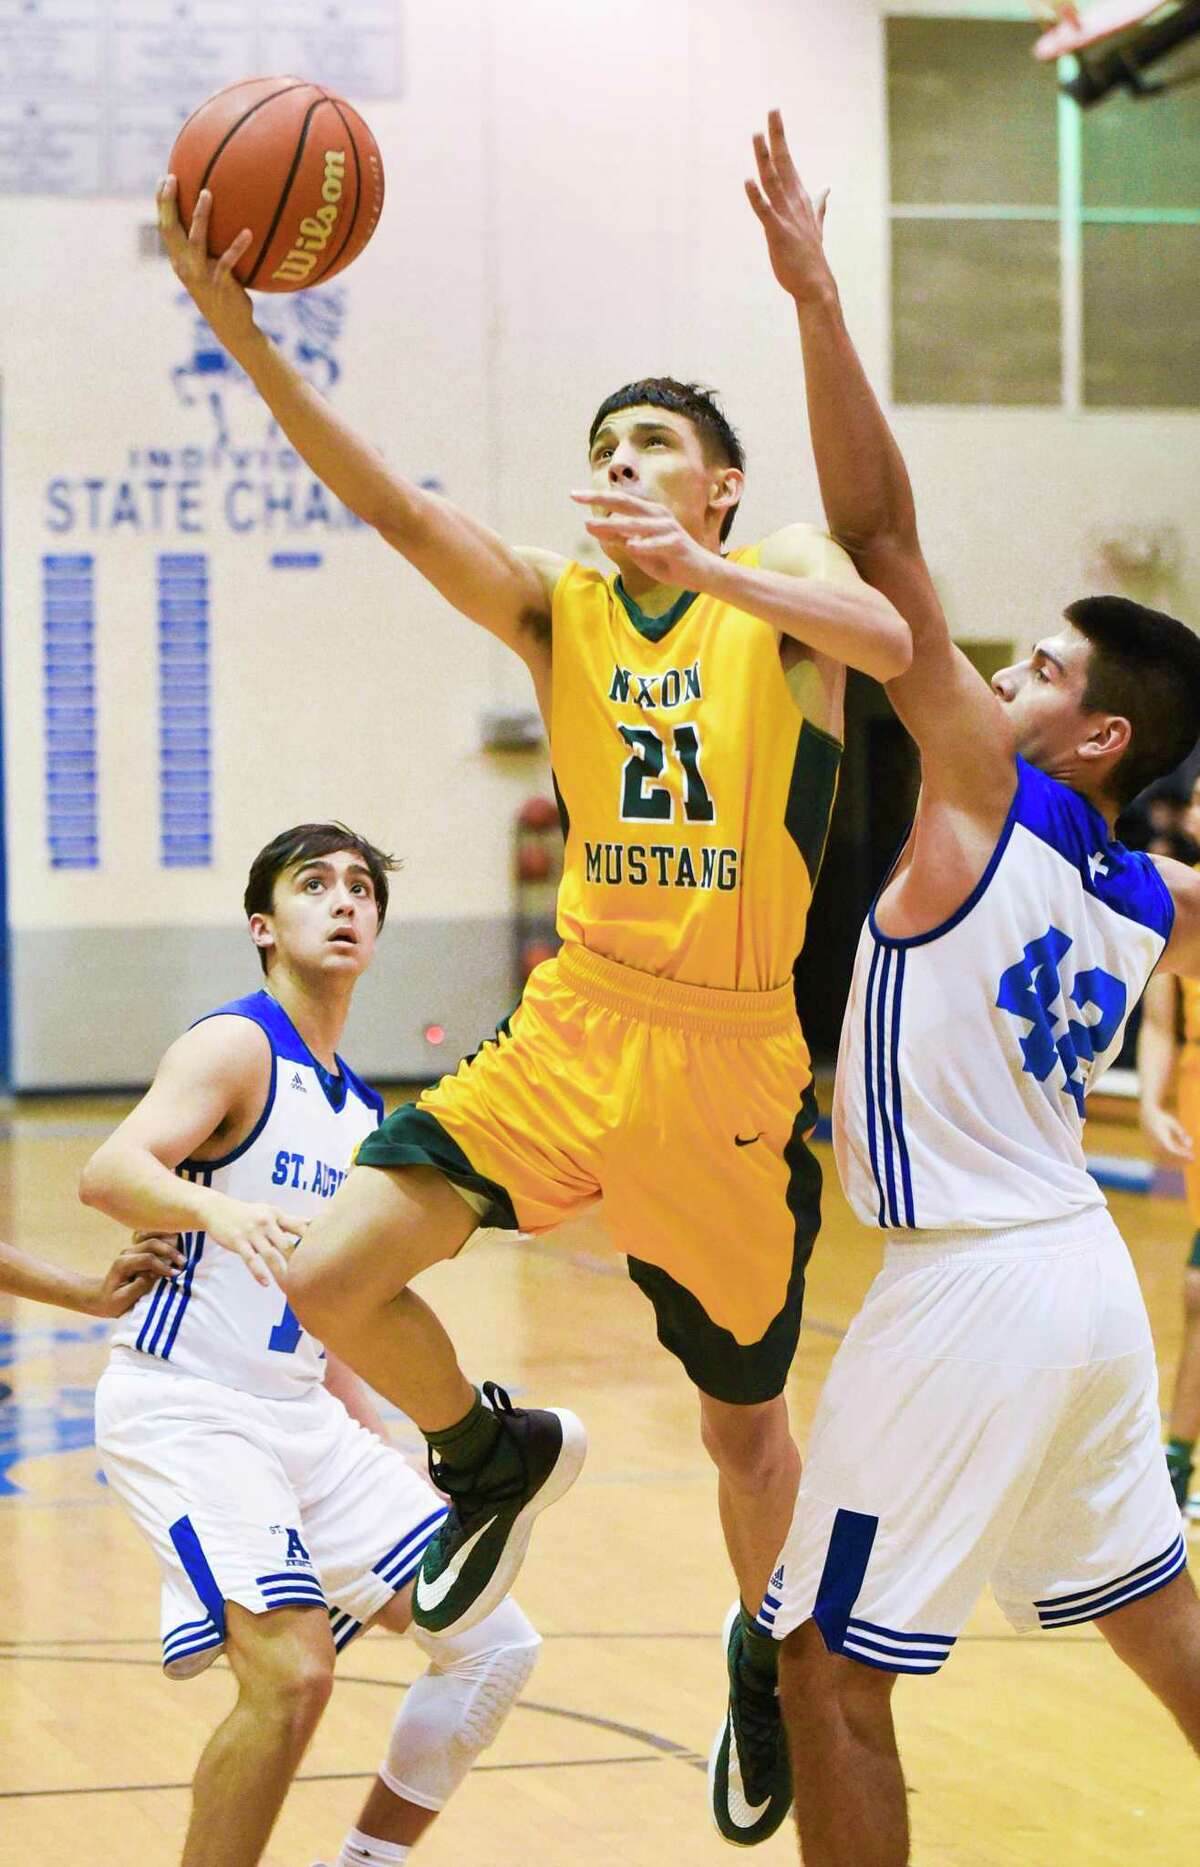 Alex Martinez shot 31% from beyond the arc last season with 36 3-pointers made. He was the top scorer off the bench for the Mustangs recording 5.9 points per game.